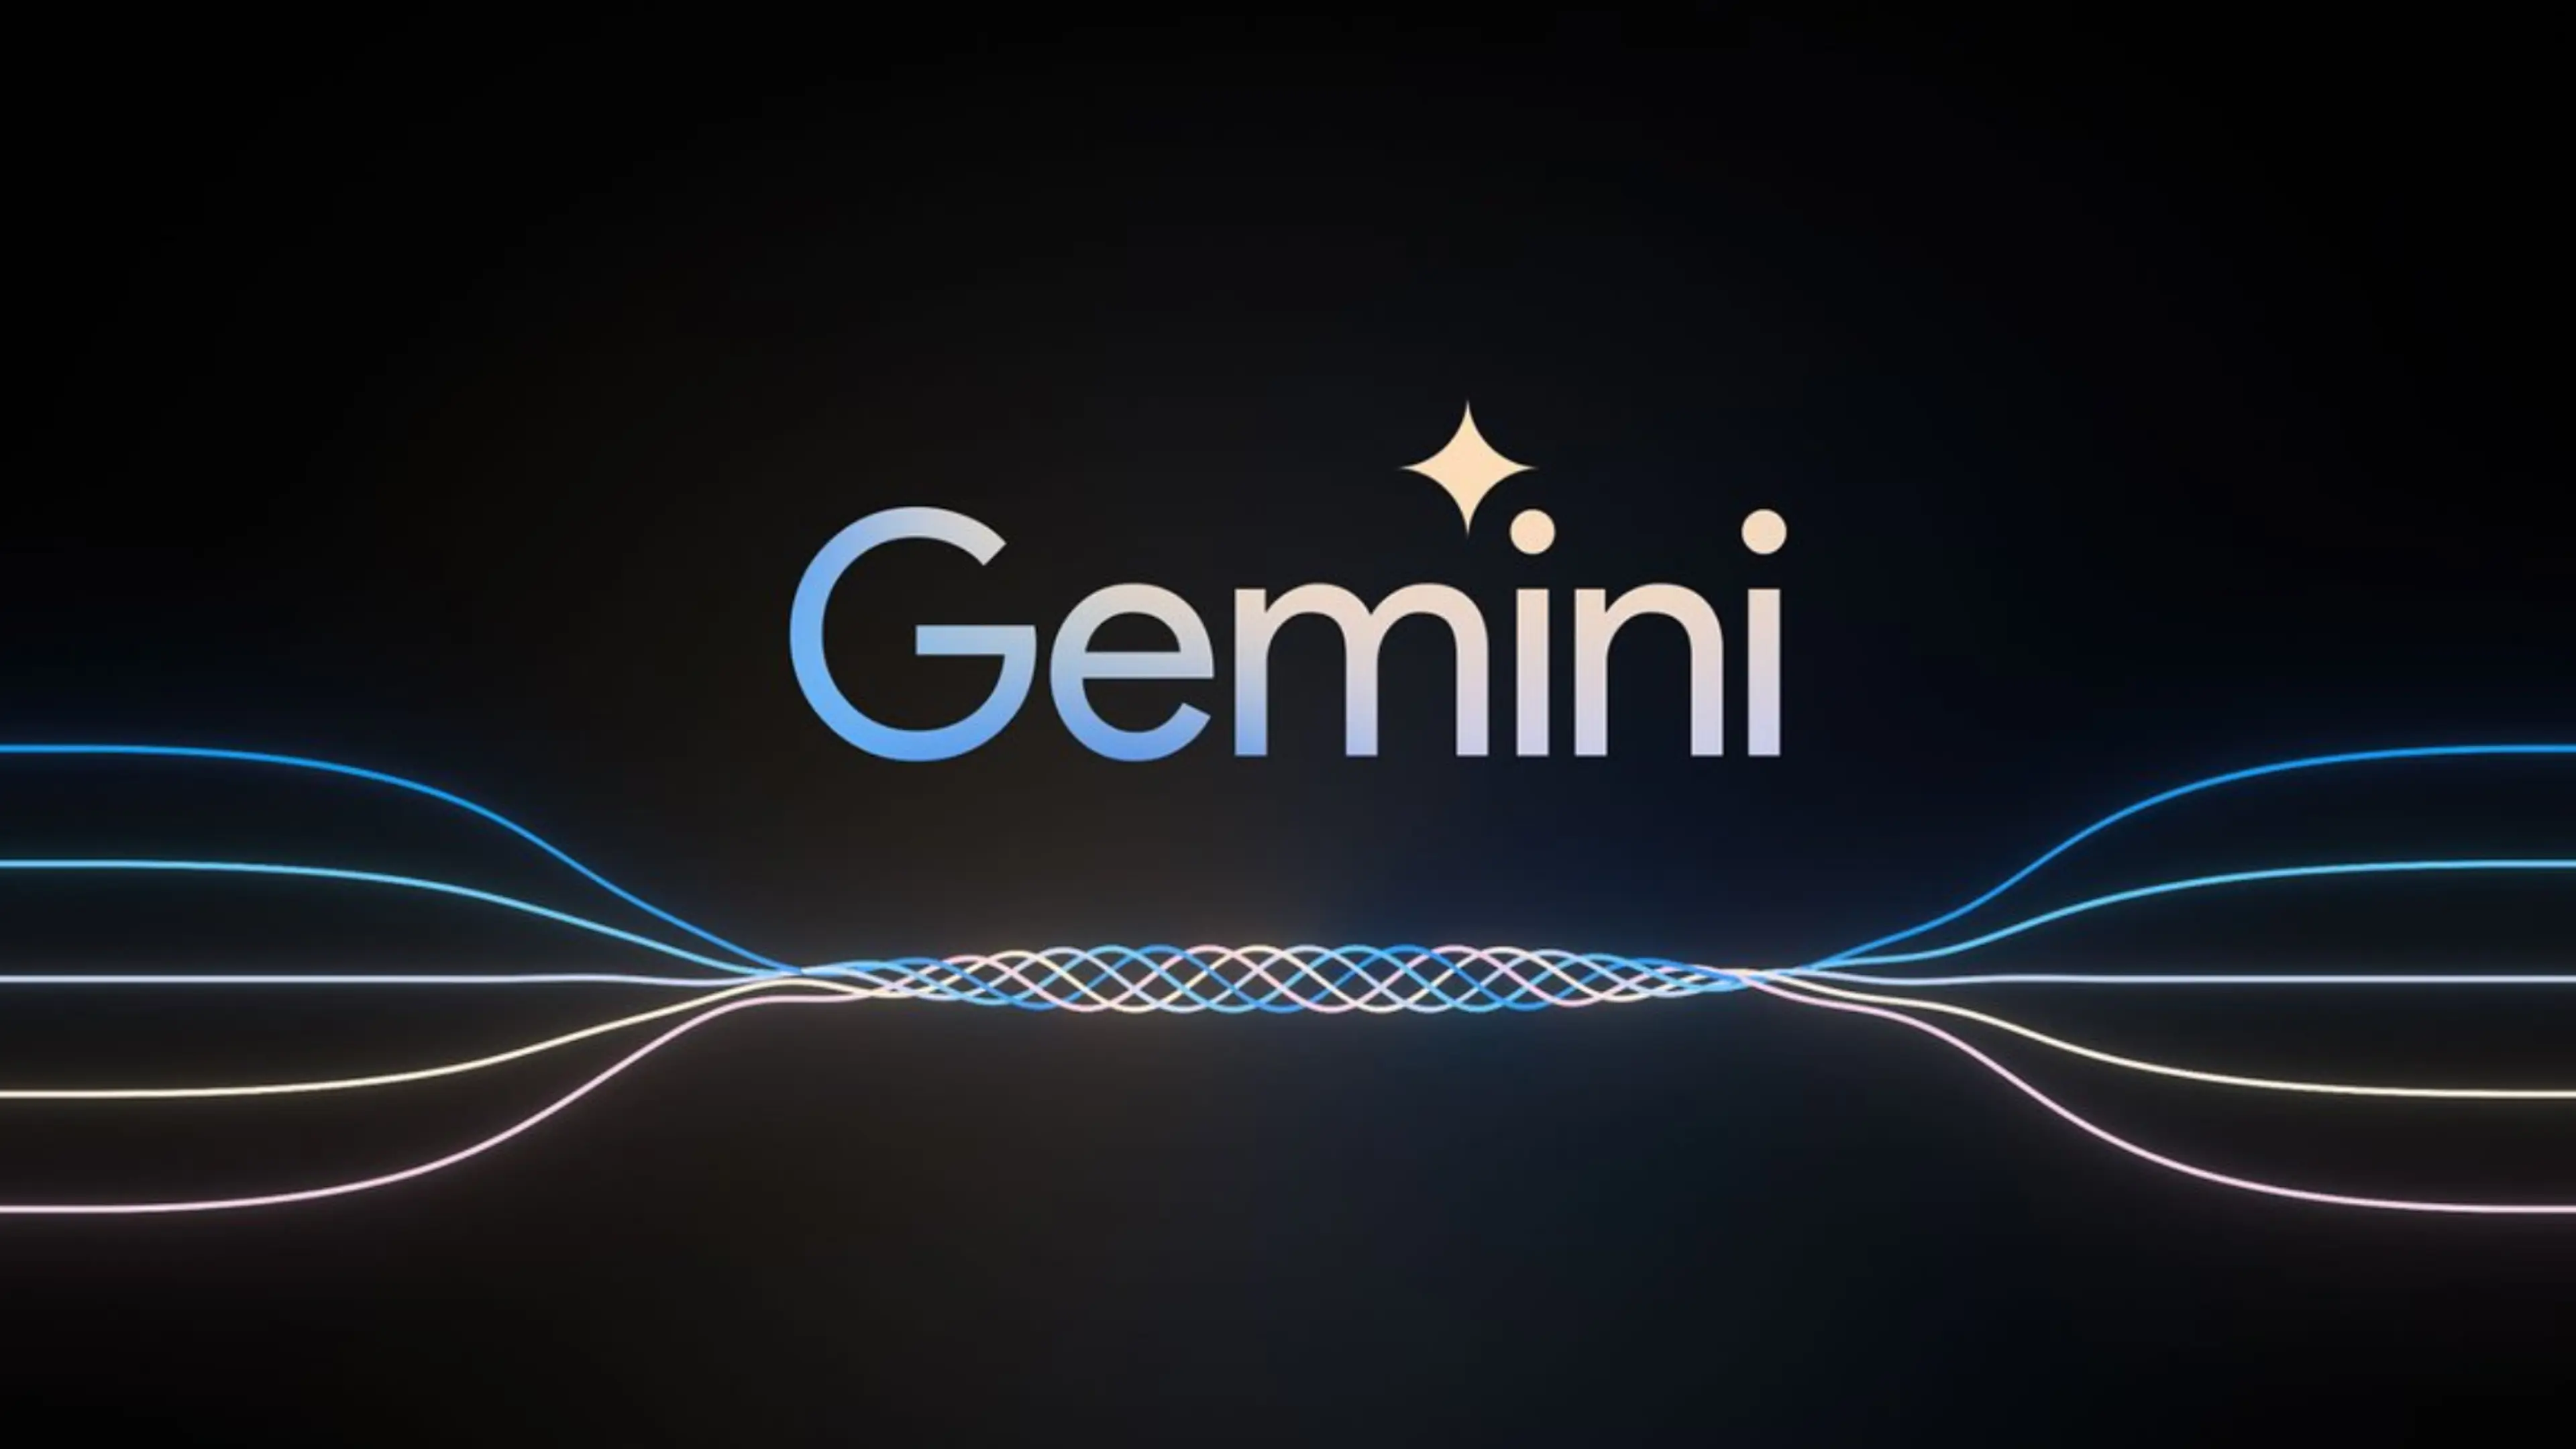 Google brings Gemini app, Gemini Advanced to India with support for nine Indian languages